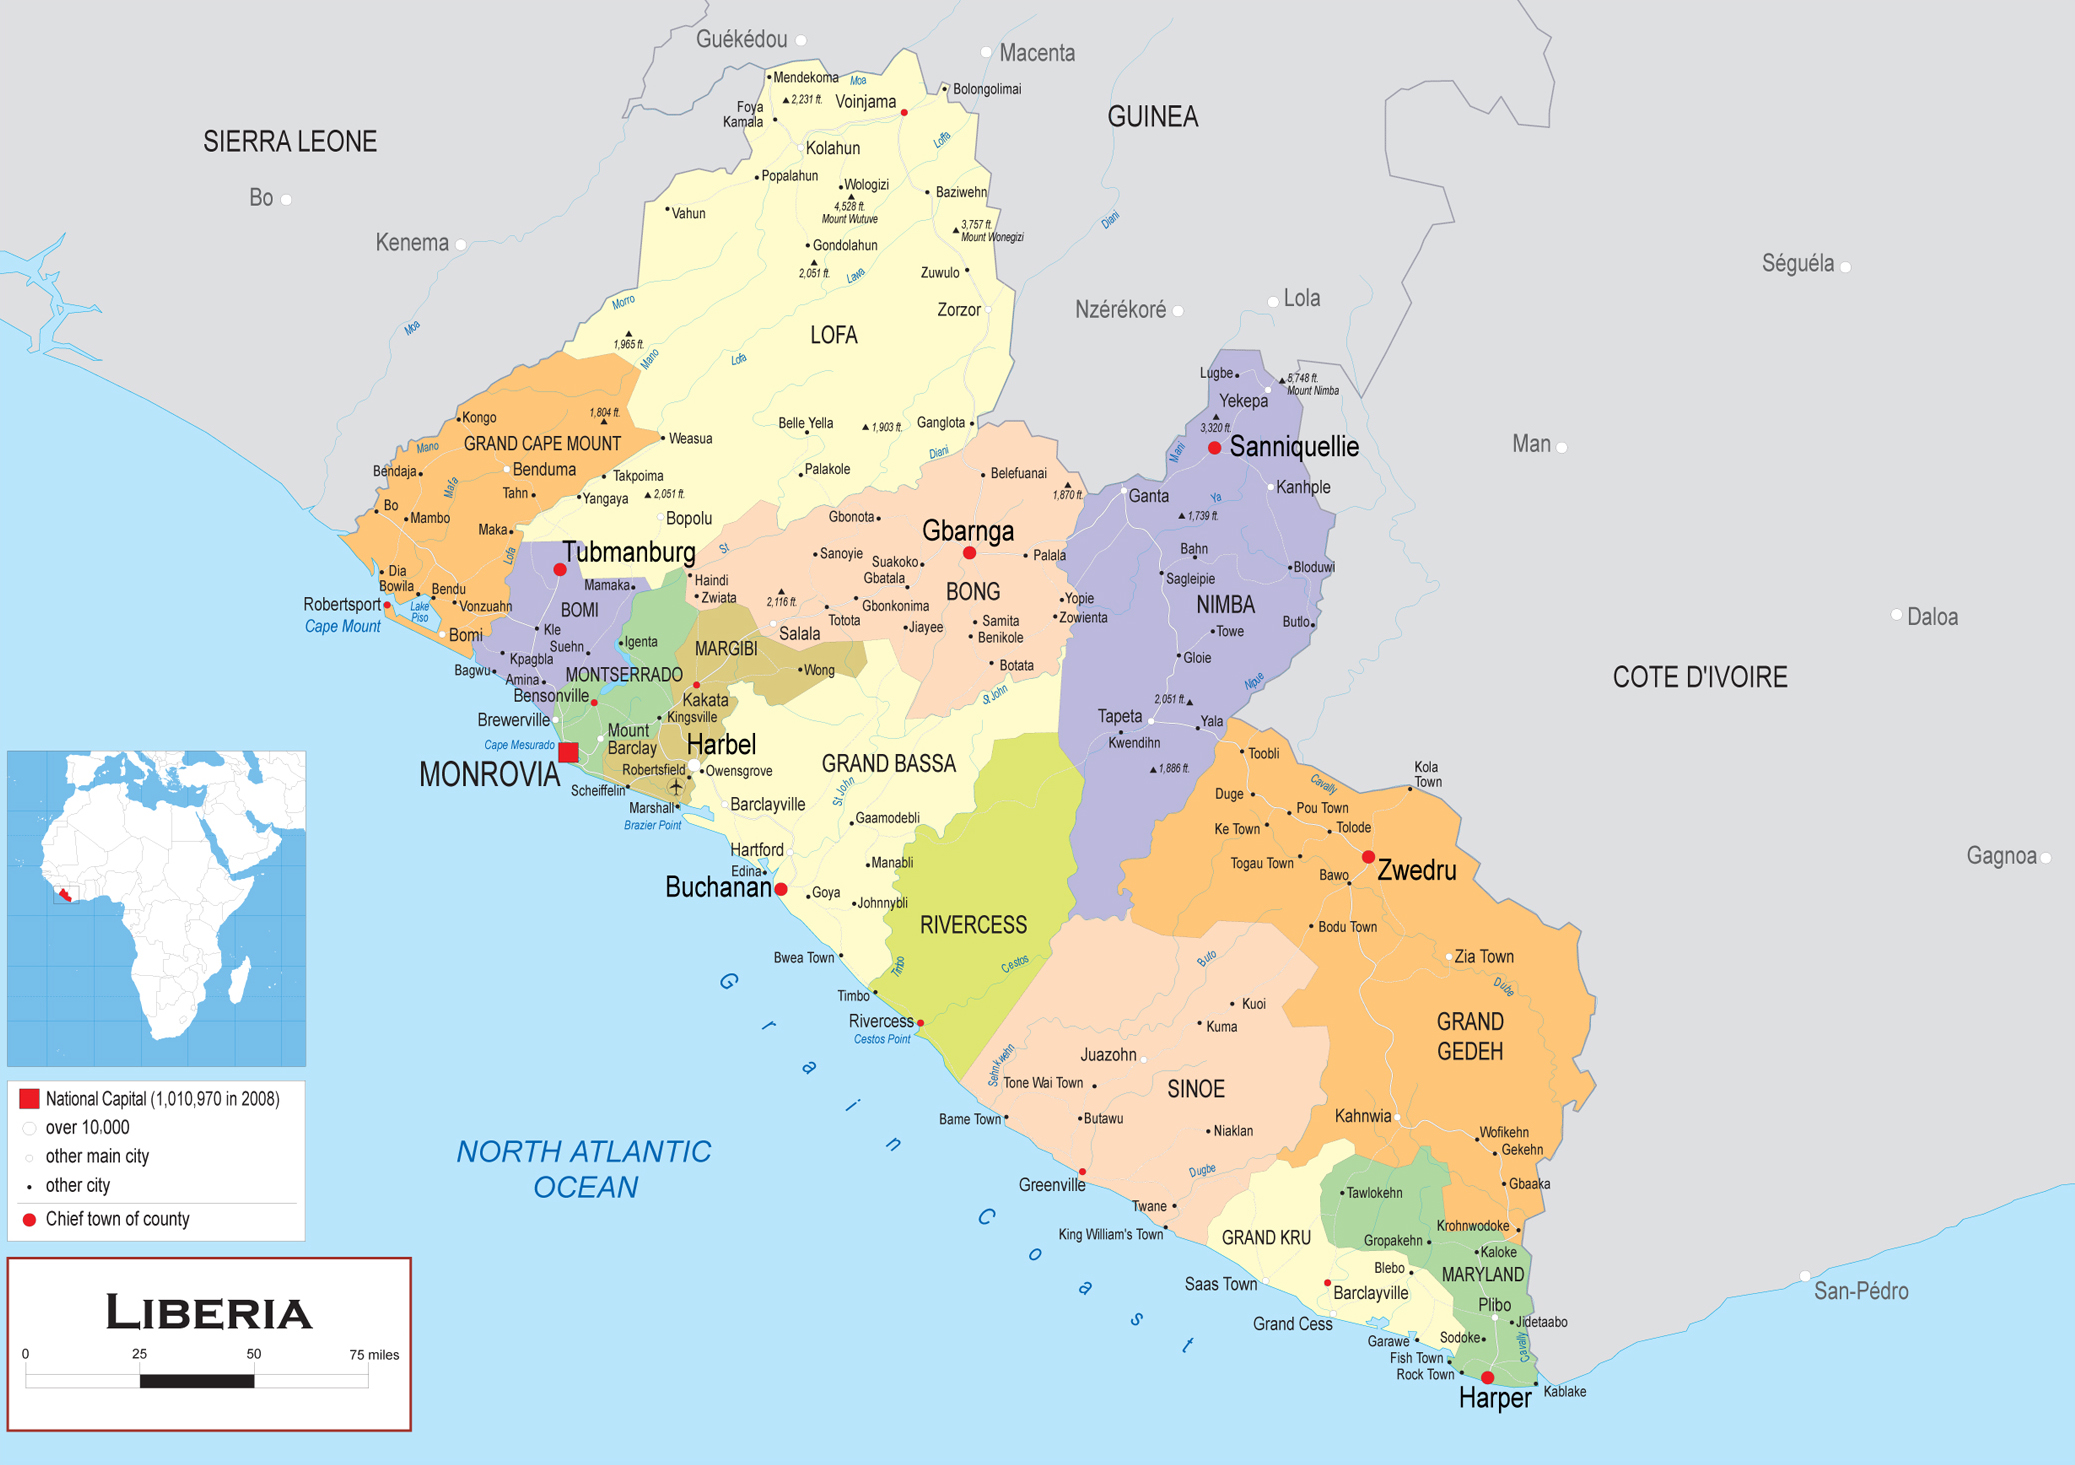 https://www.mapsland.com/maps/africa/liberia/large-political-and-administrative-map-of-liberia-with-other-marks.jpg